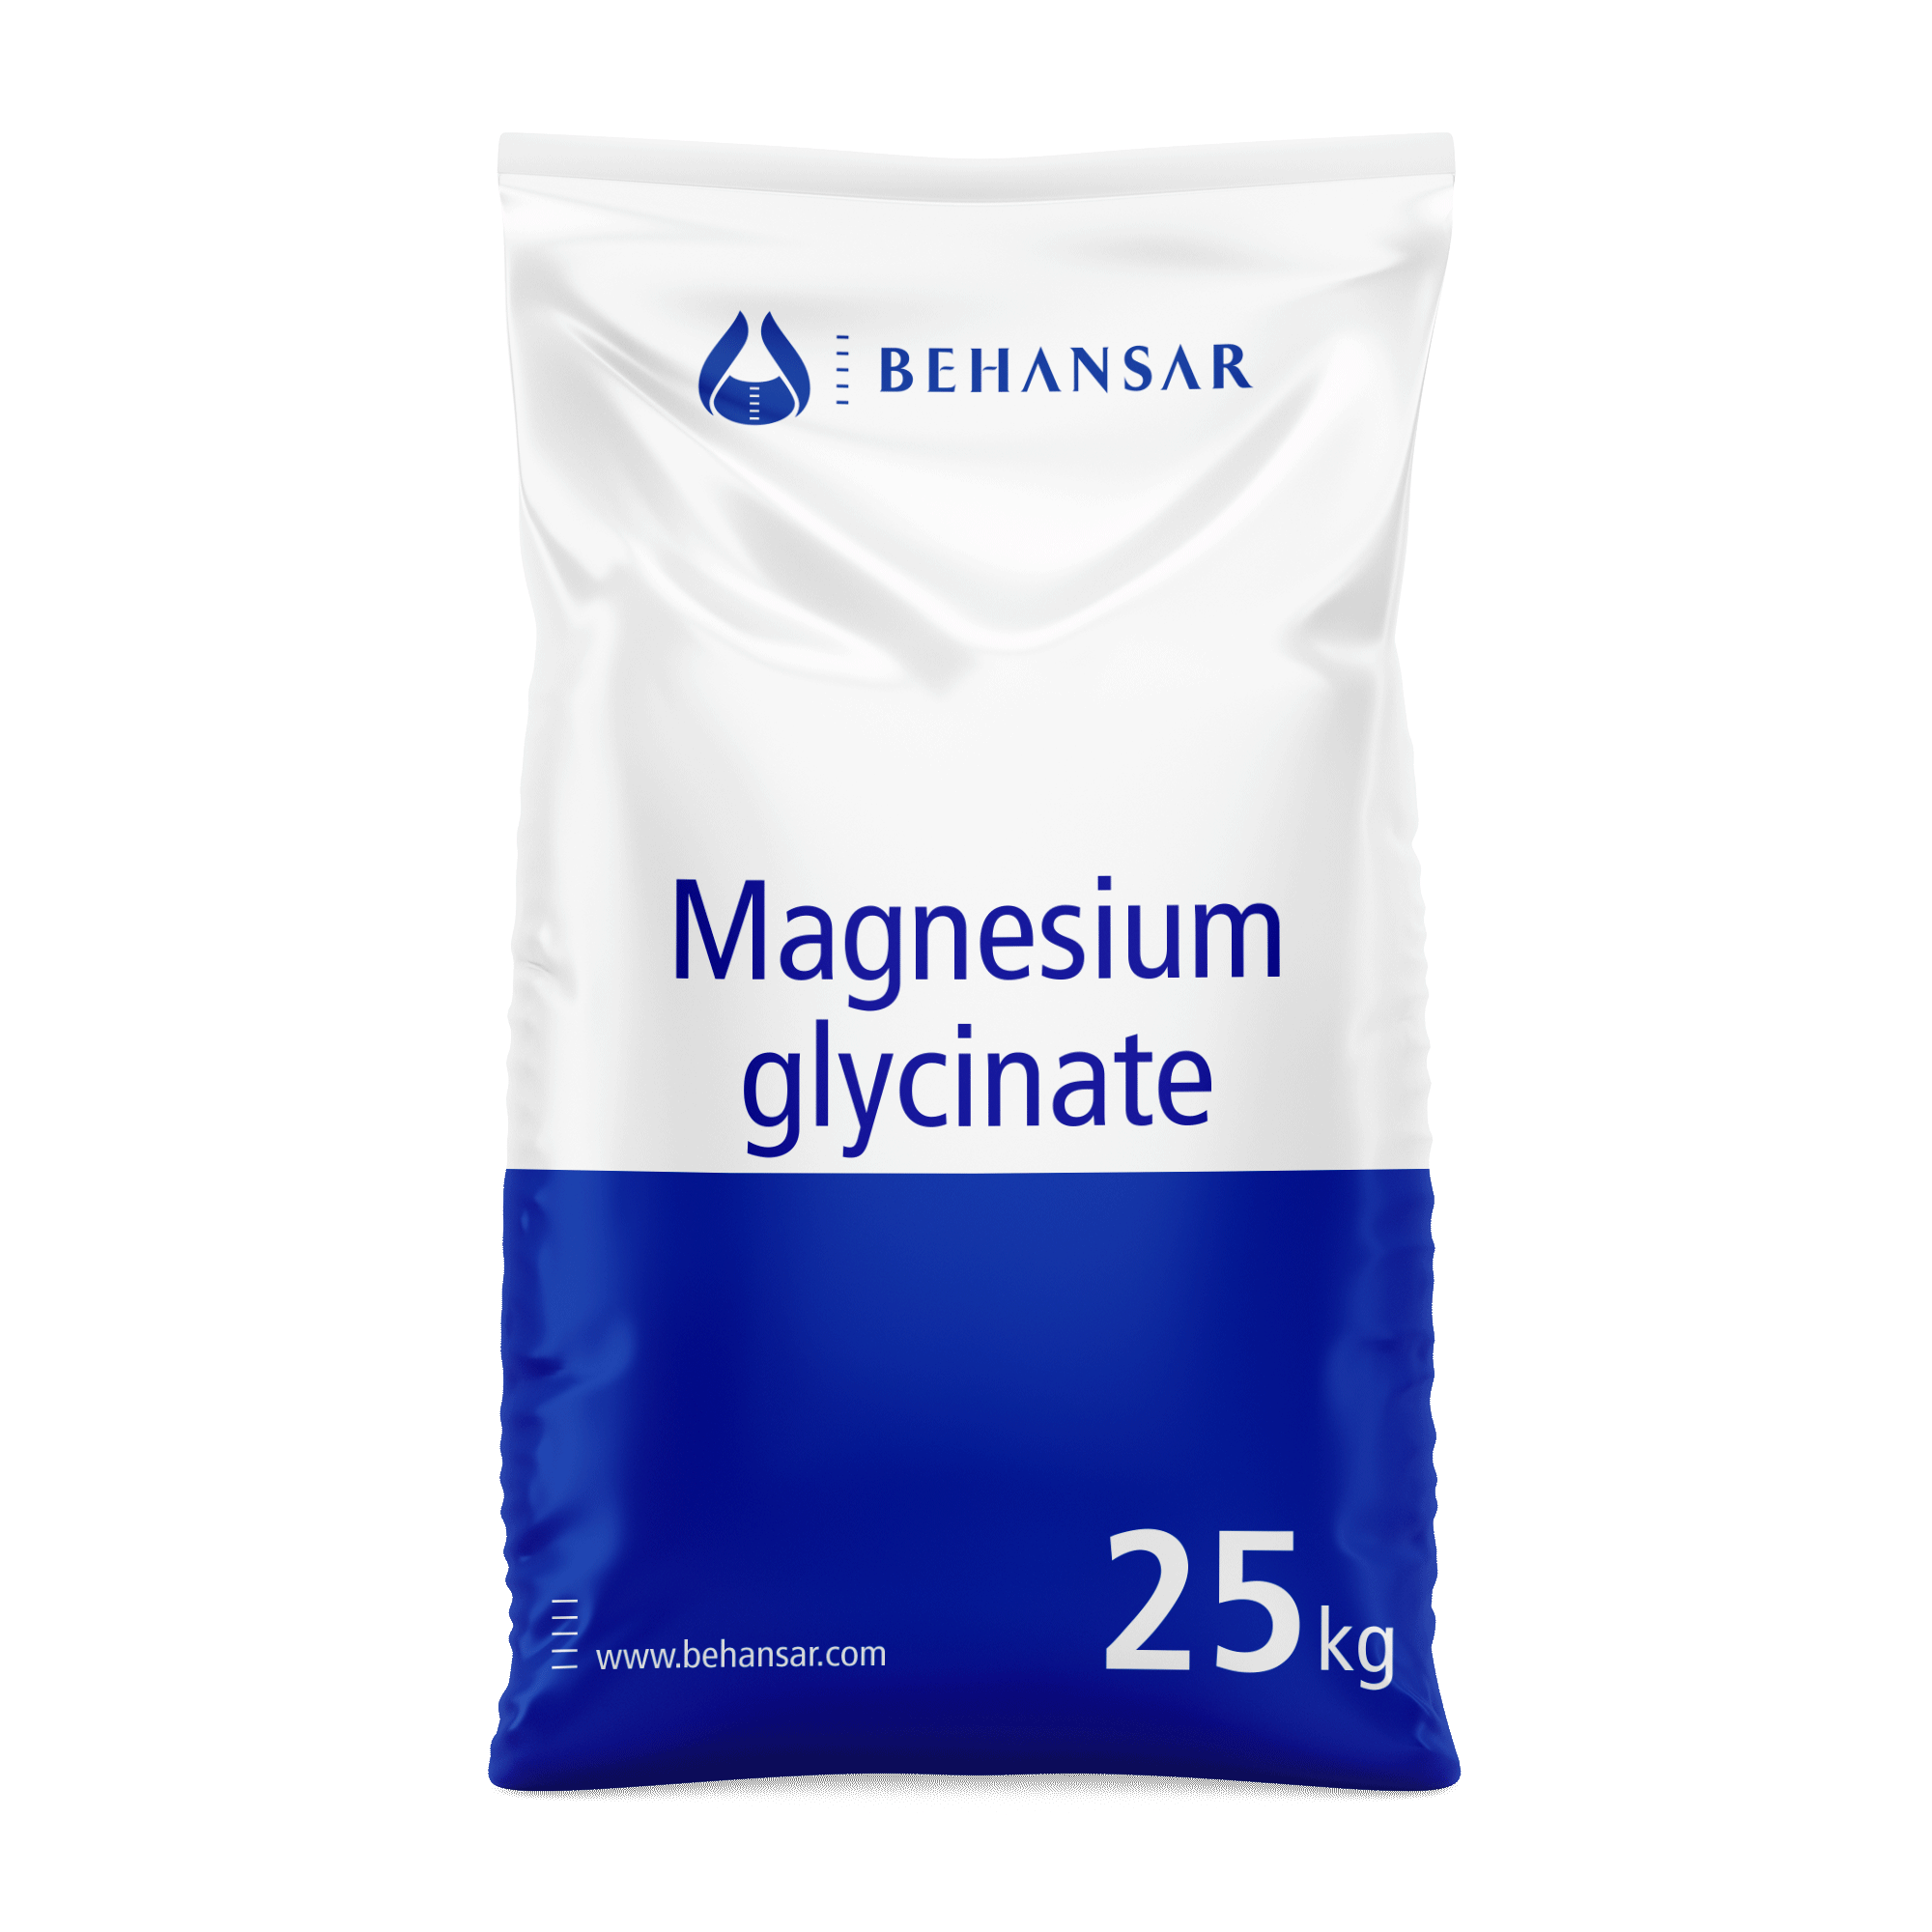 Magnesium glycinate is one of the products of Behansar Co